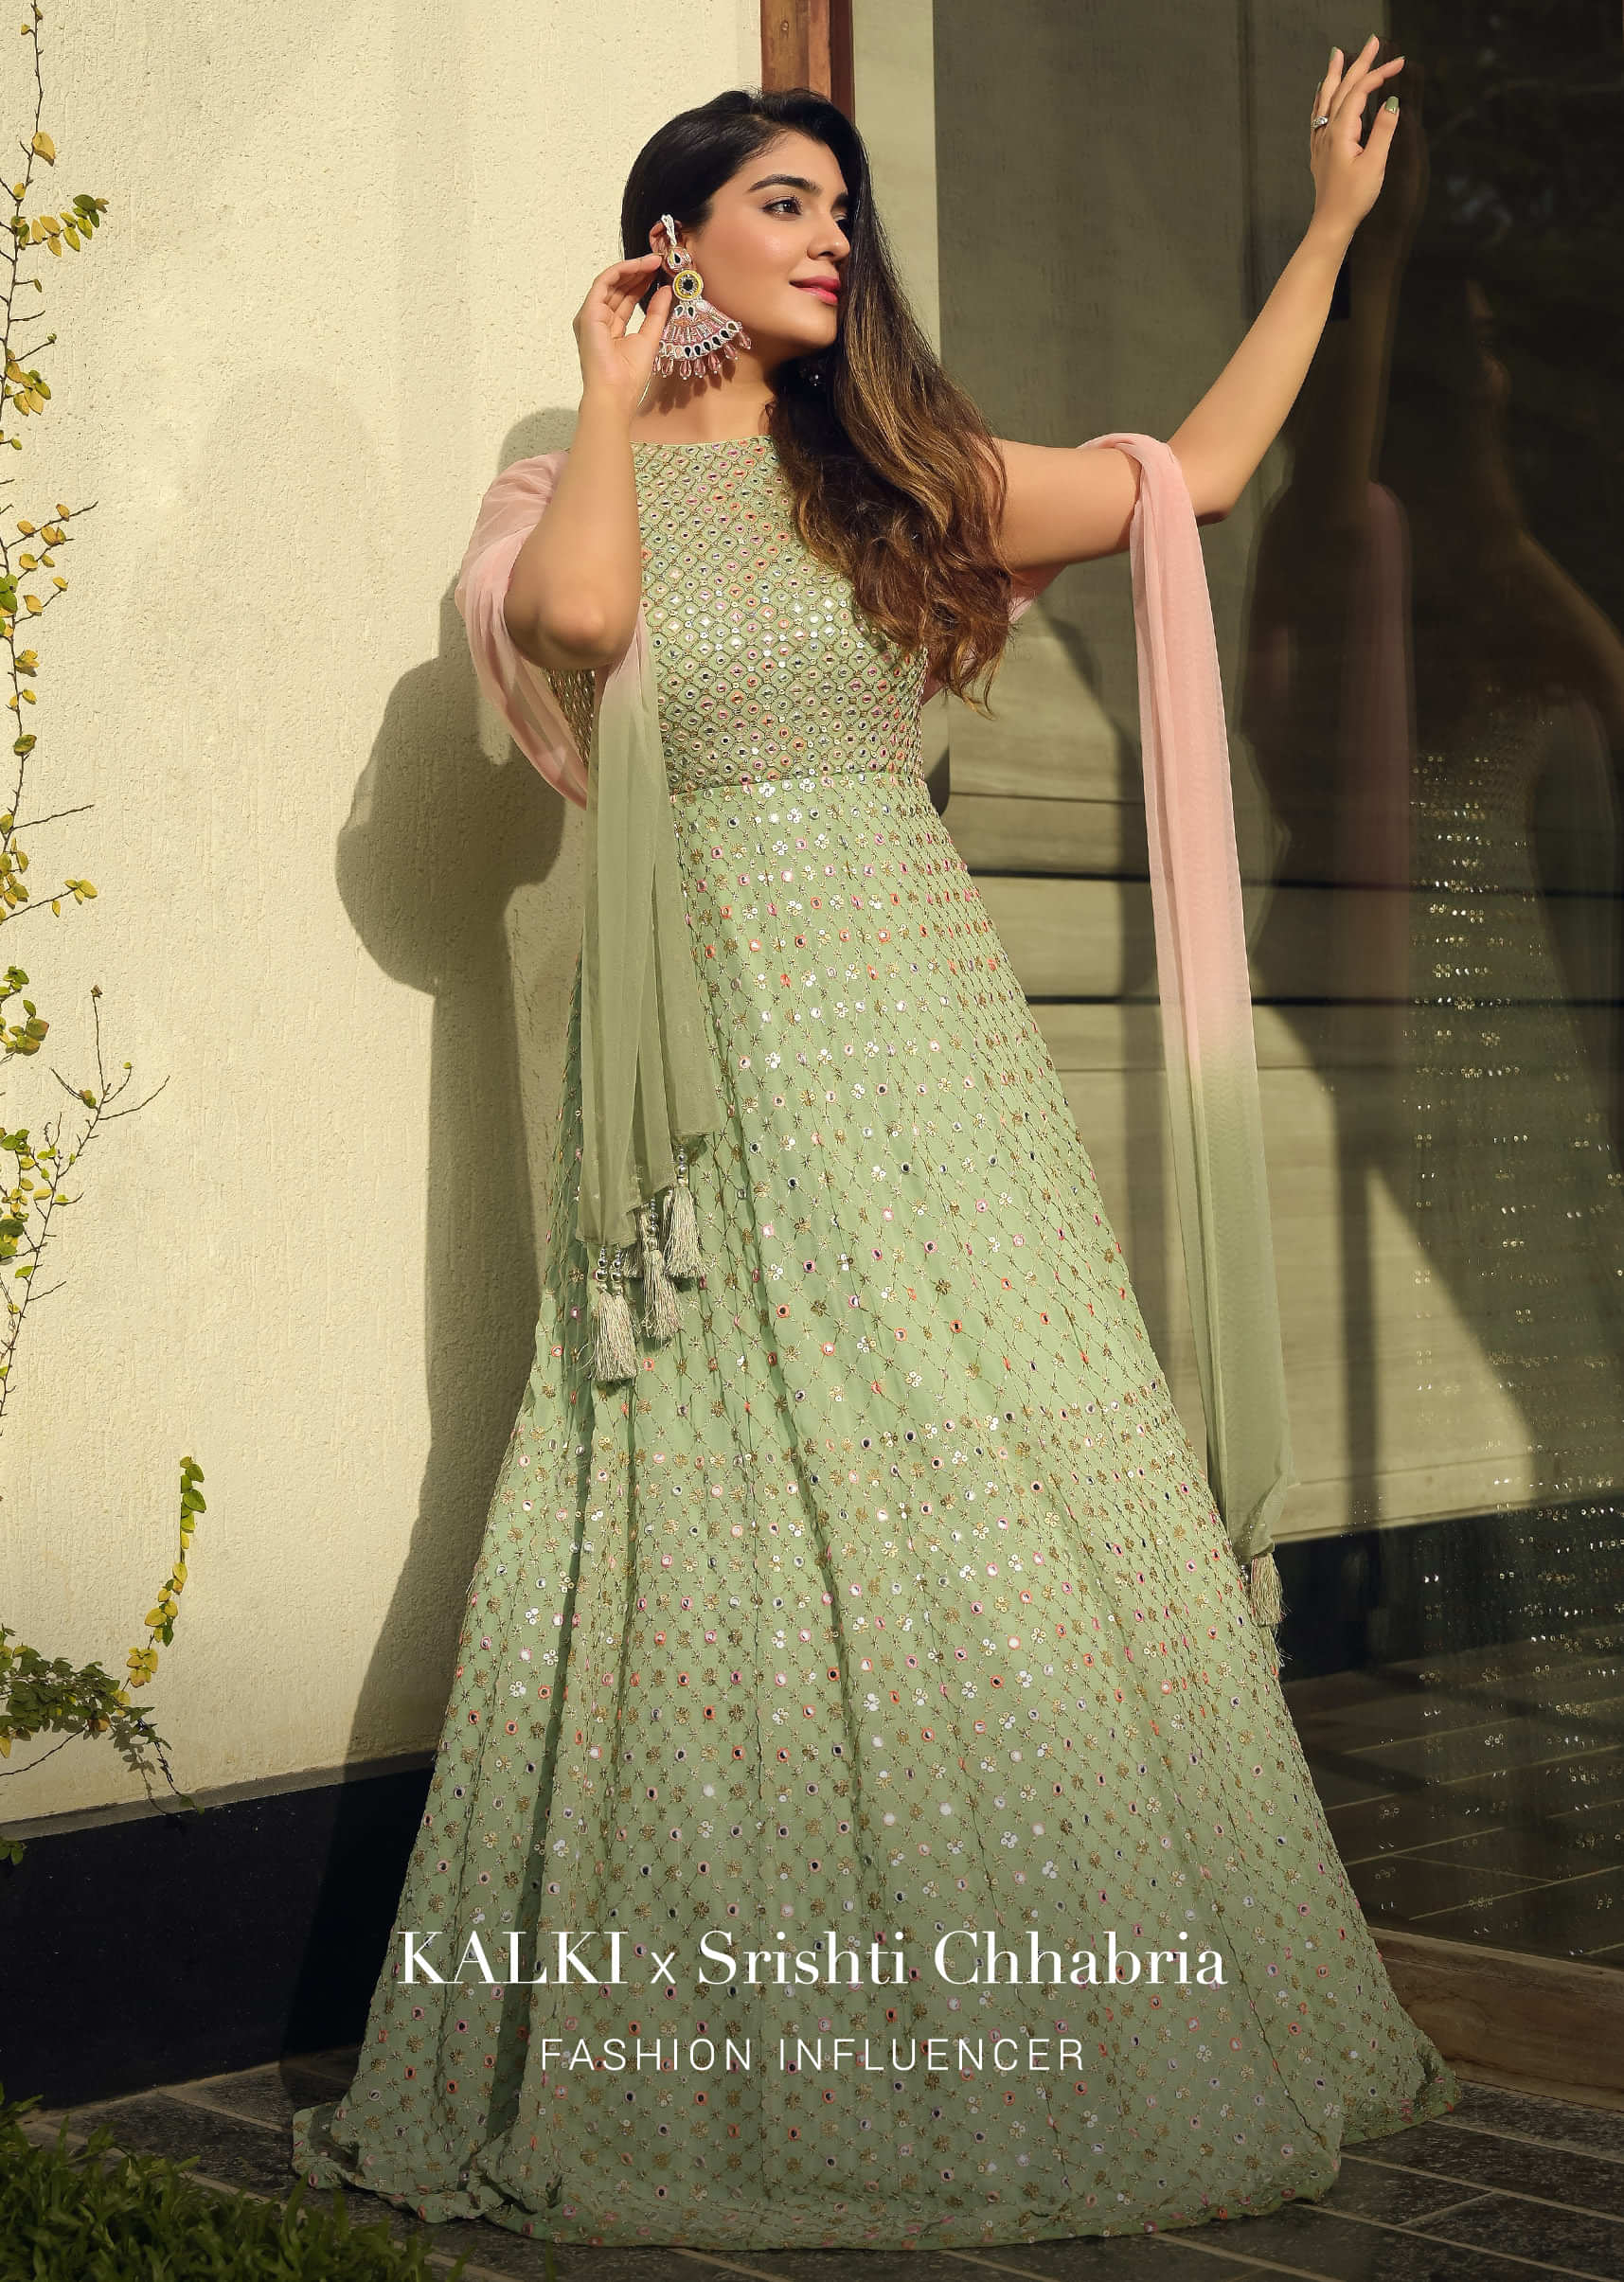 Opaline Green Anarkali Suit In Georgette With Halter Neckline And Multi Colored Resham And Mirror Embroidery All Over